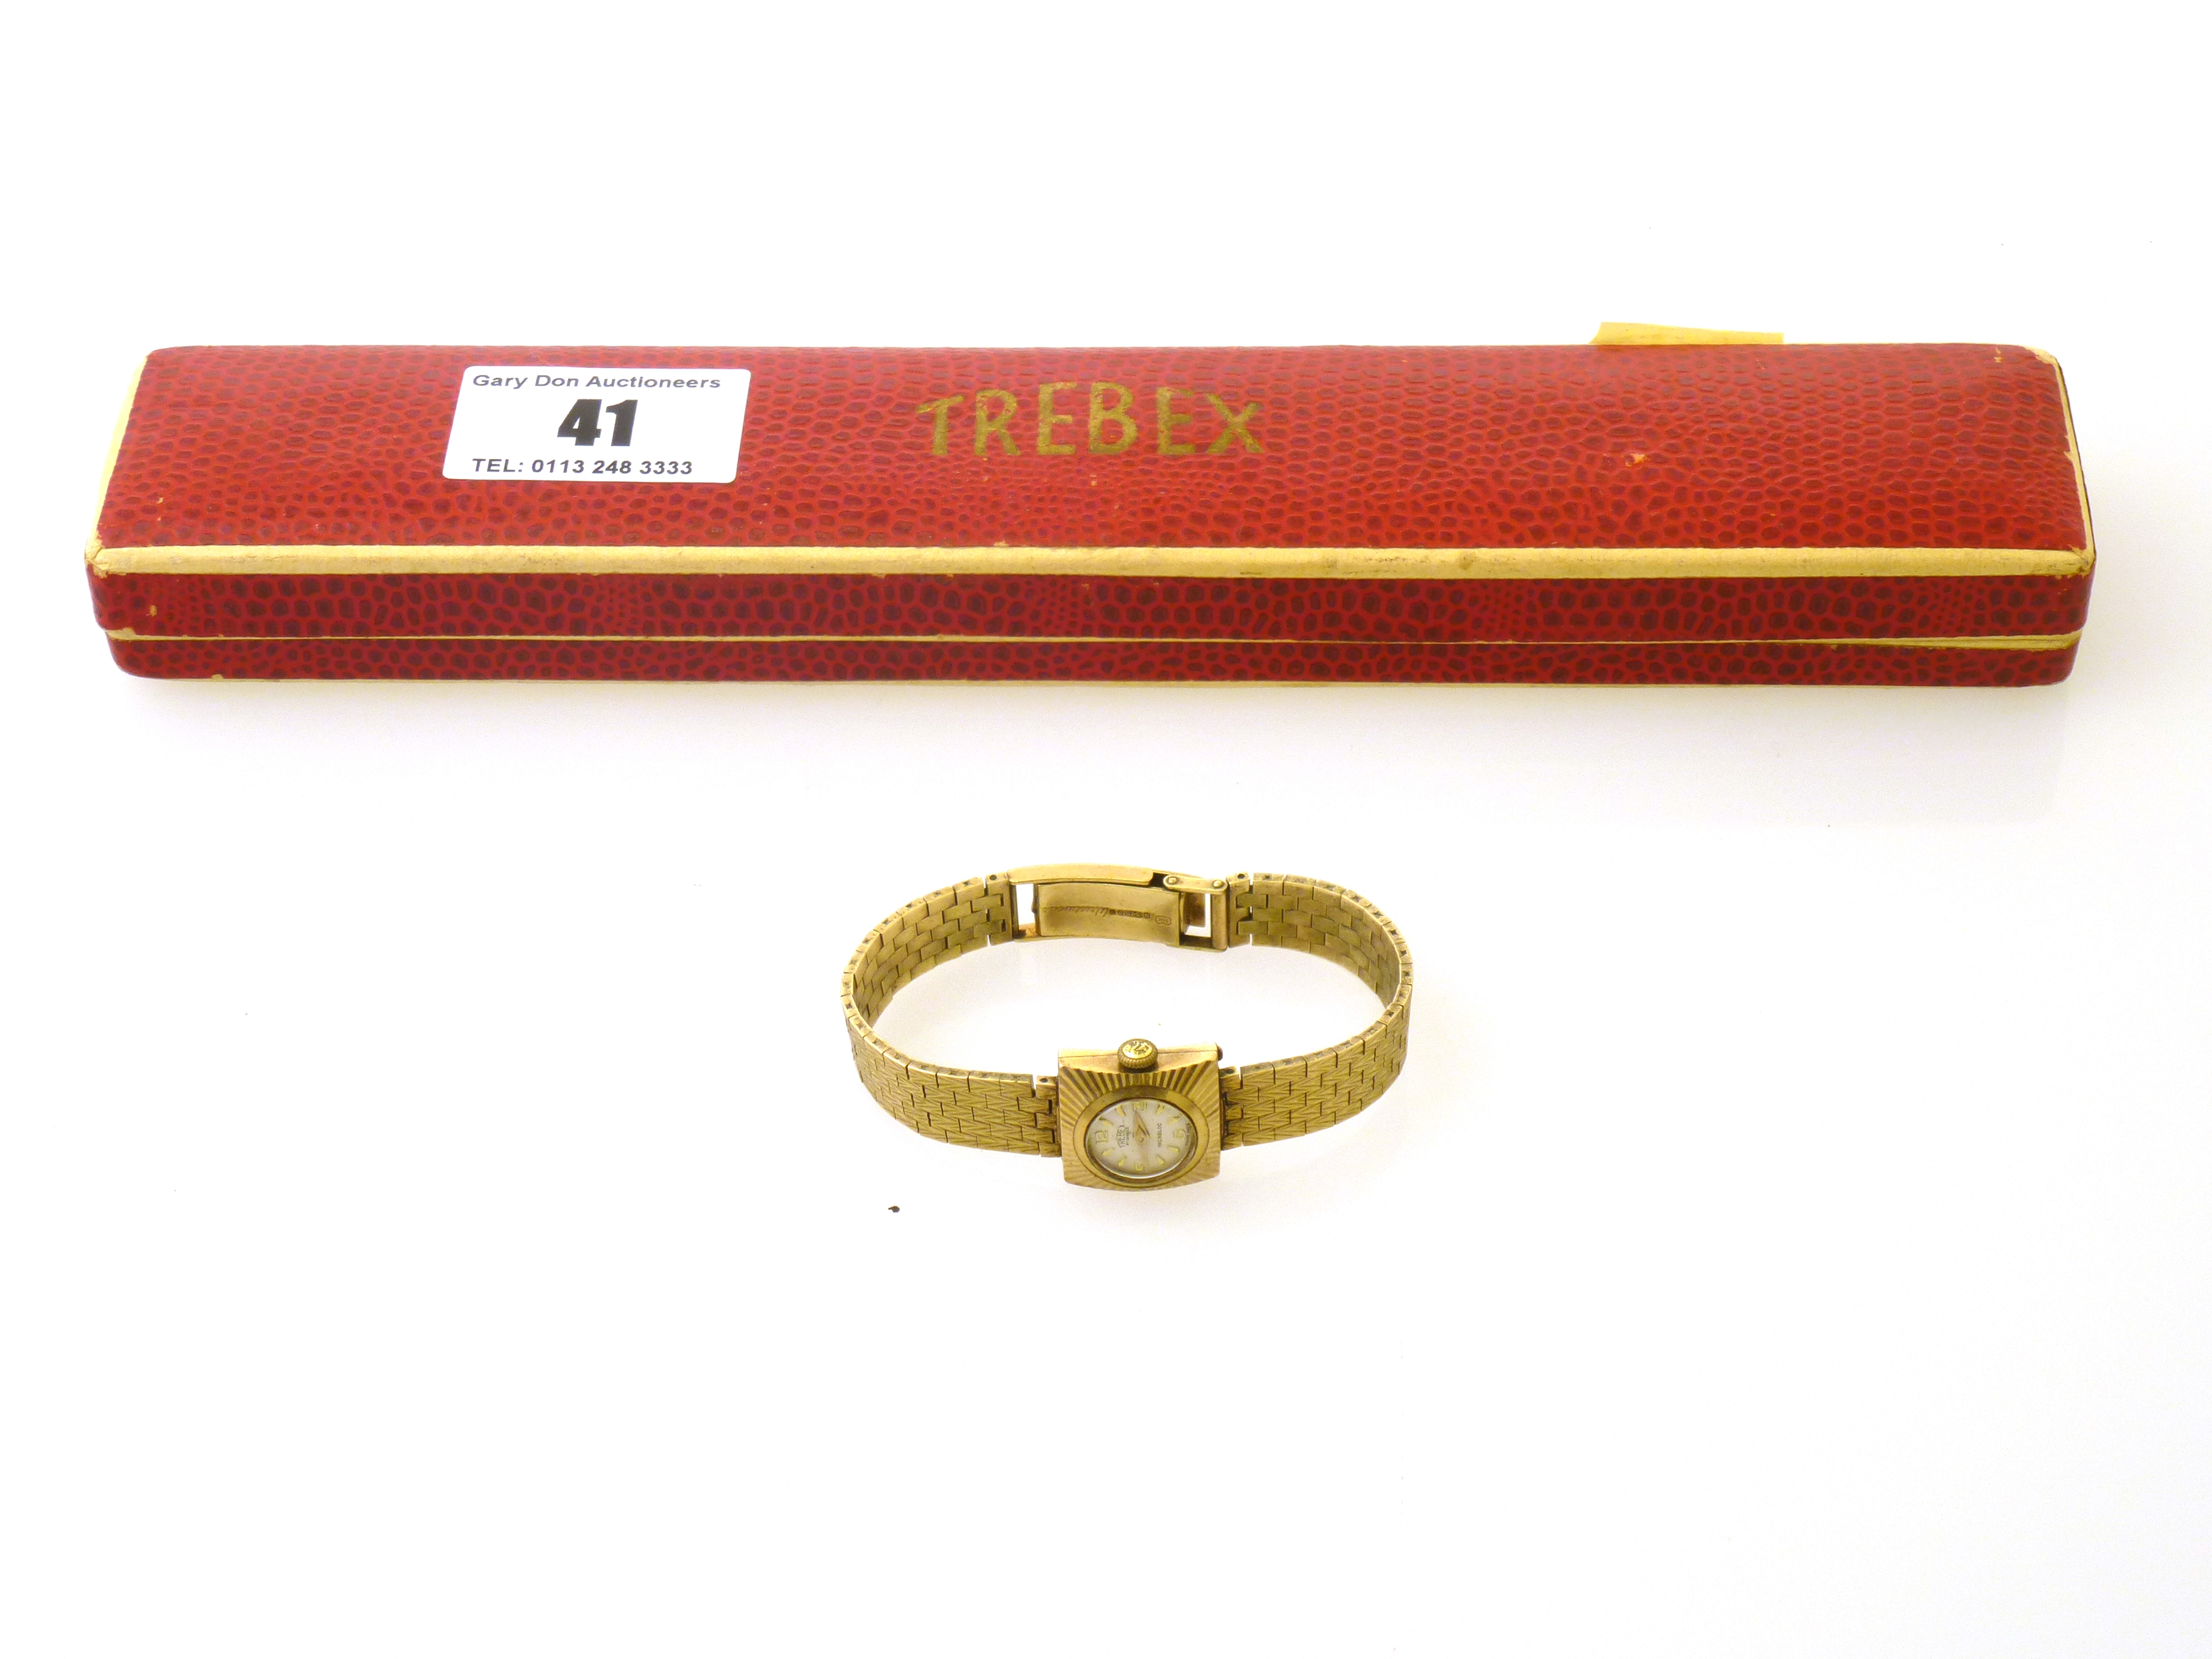 9K YELLOW GOLD TREBEX WATCH WITH A DIAMOND CUT BRACELET. WEIGHT IN TOTAL 23.7G - Image 2 of 2